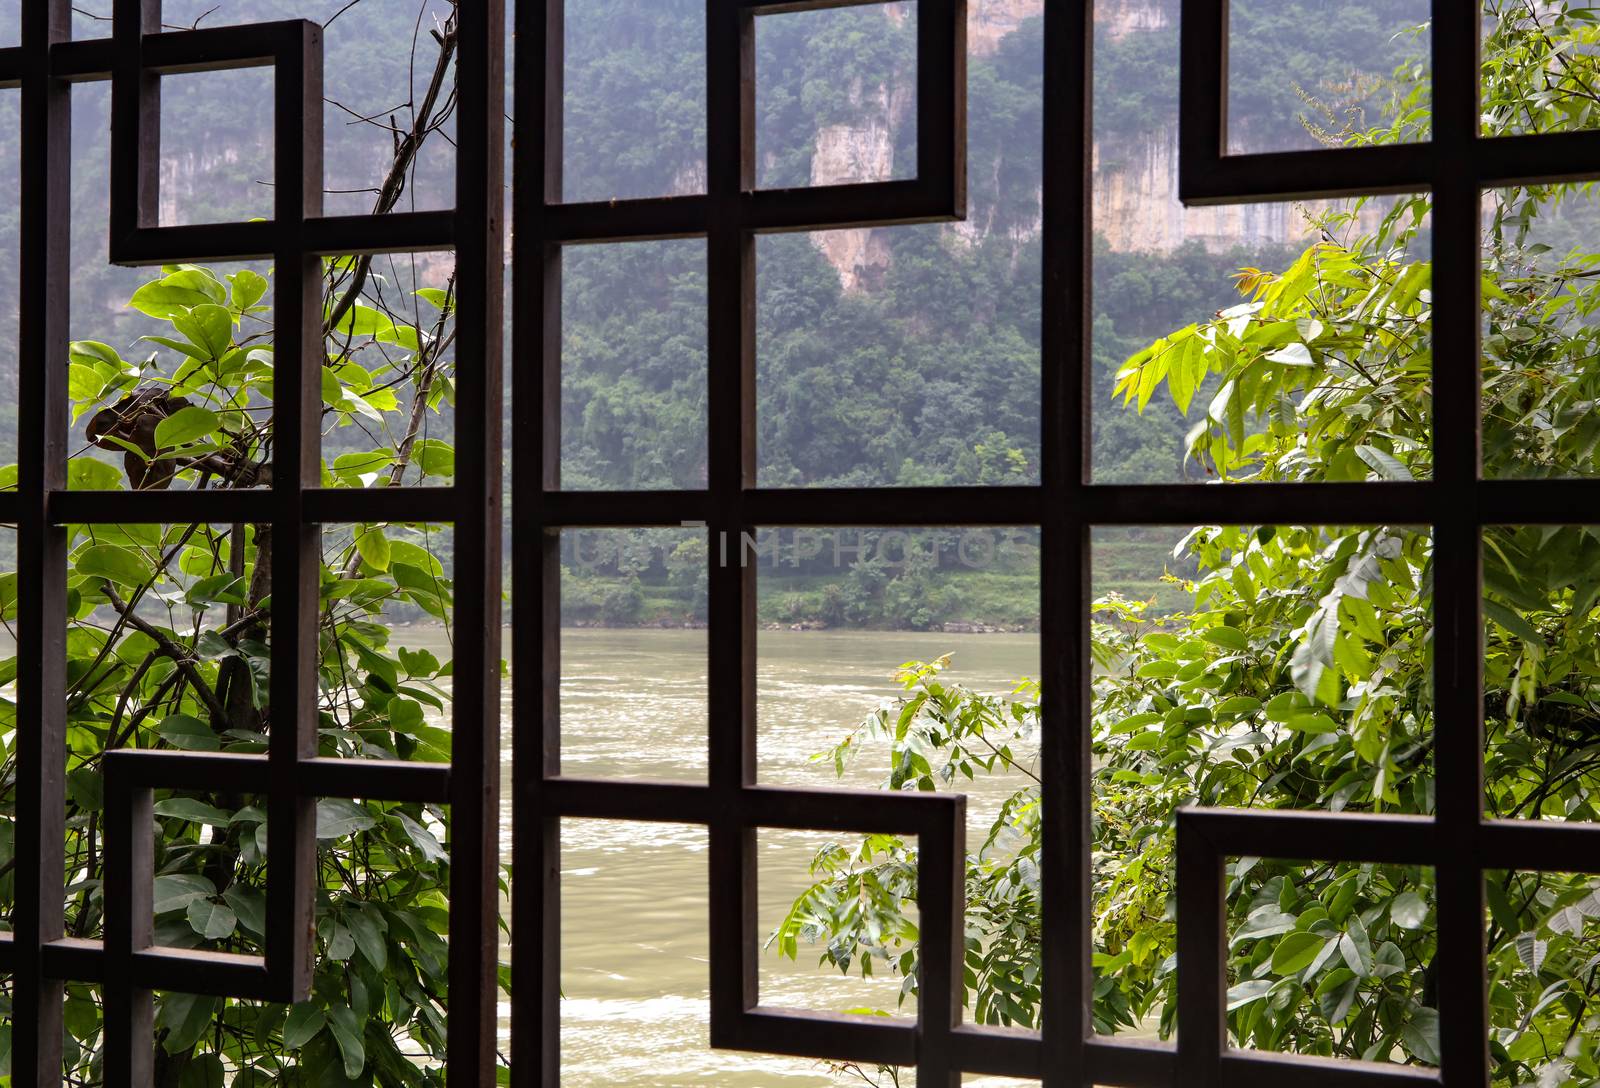 An amazing view of the Yangtze river in China from an ornate wooden window like panel.